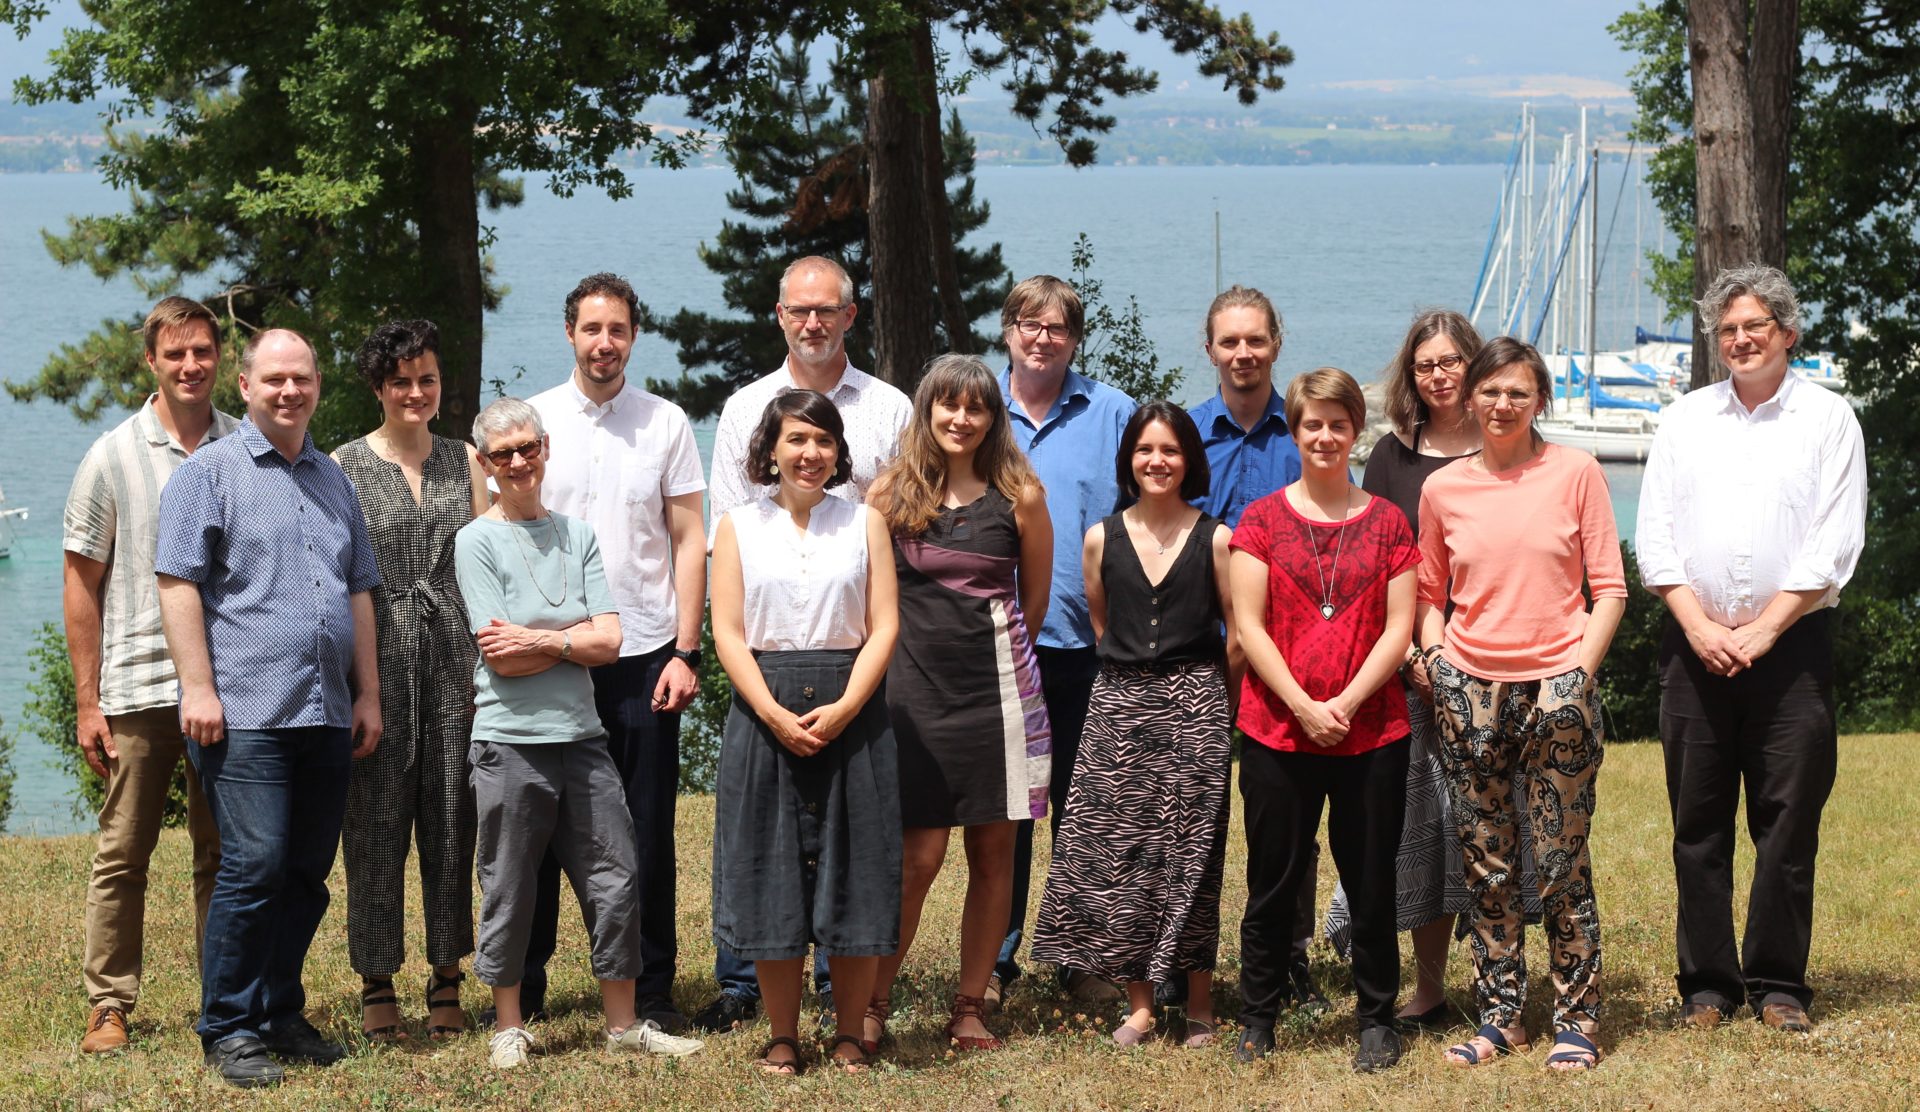 15 members of the itDf team pose for a group photograph on the lake shire, with tress and boats seen in the background. There are 7 males and 8 females.